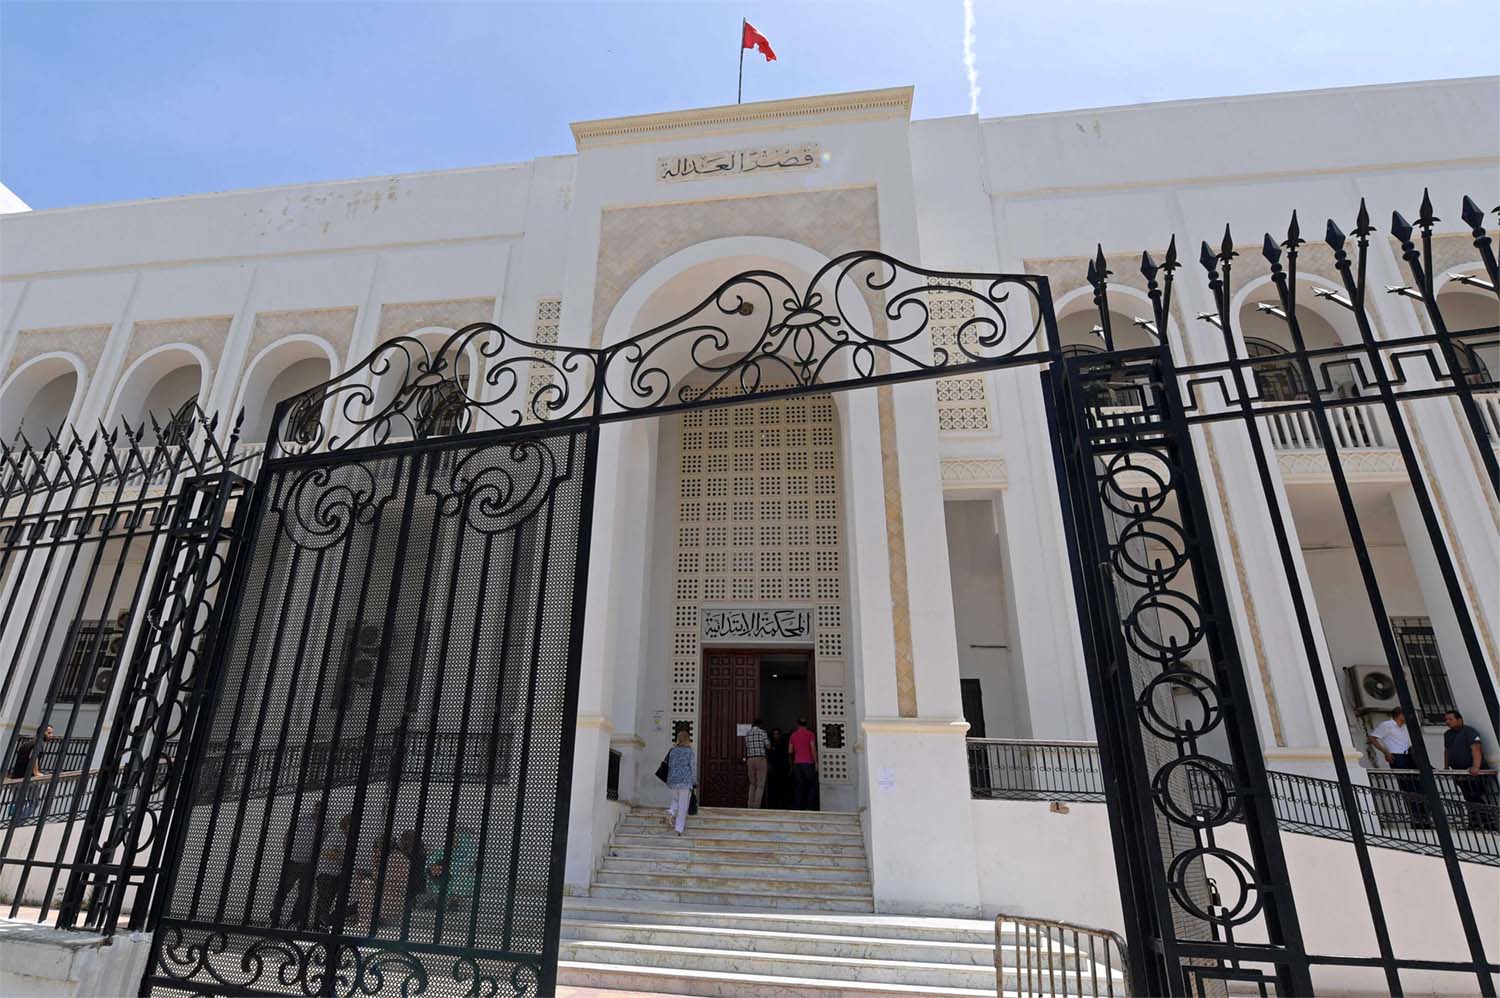 Rights groups have voiced increasing concern over political freedoms in Tunisia since Saied's seizure of most powers in 2021 